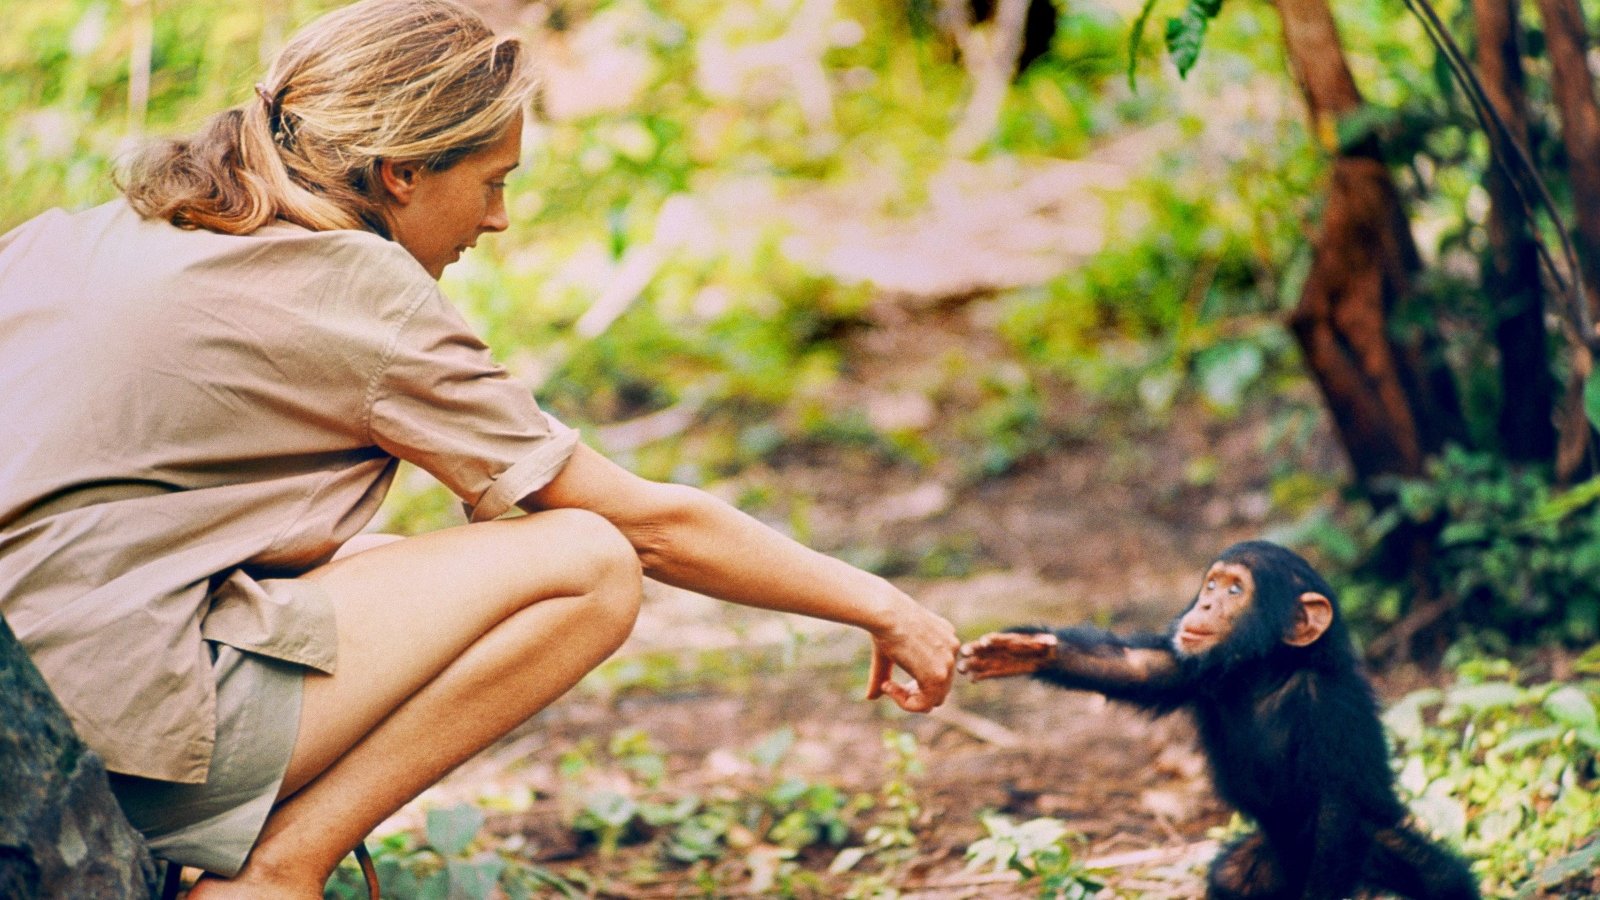 Jane Goodall reaches for baby chimp in the wild